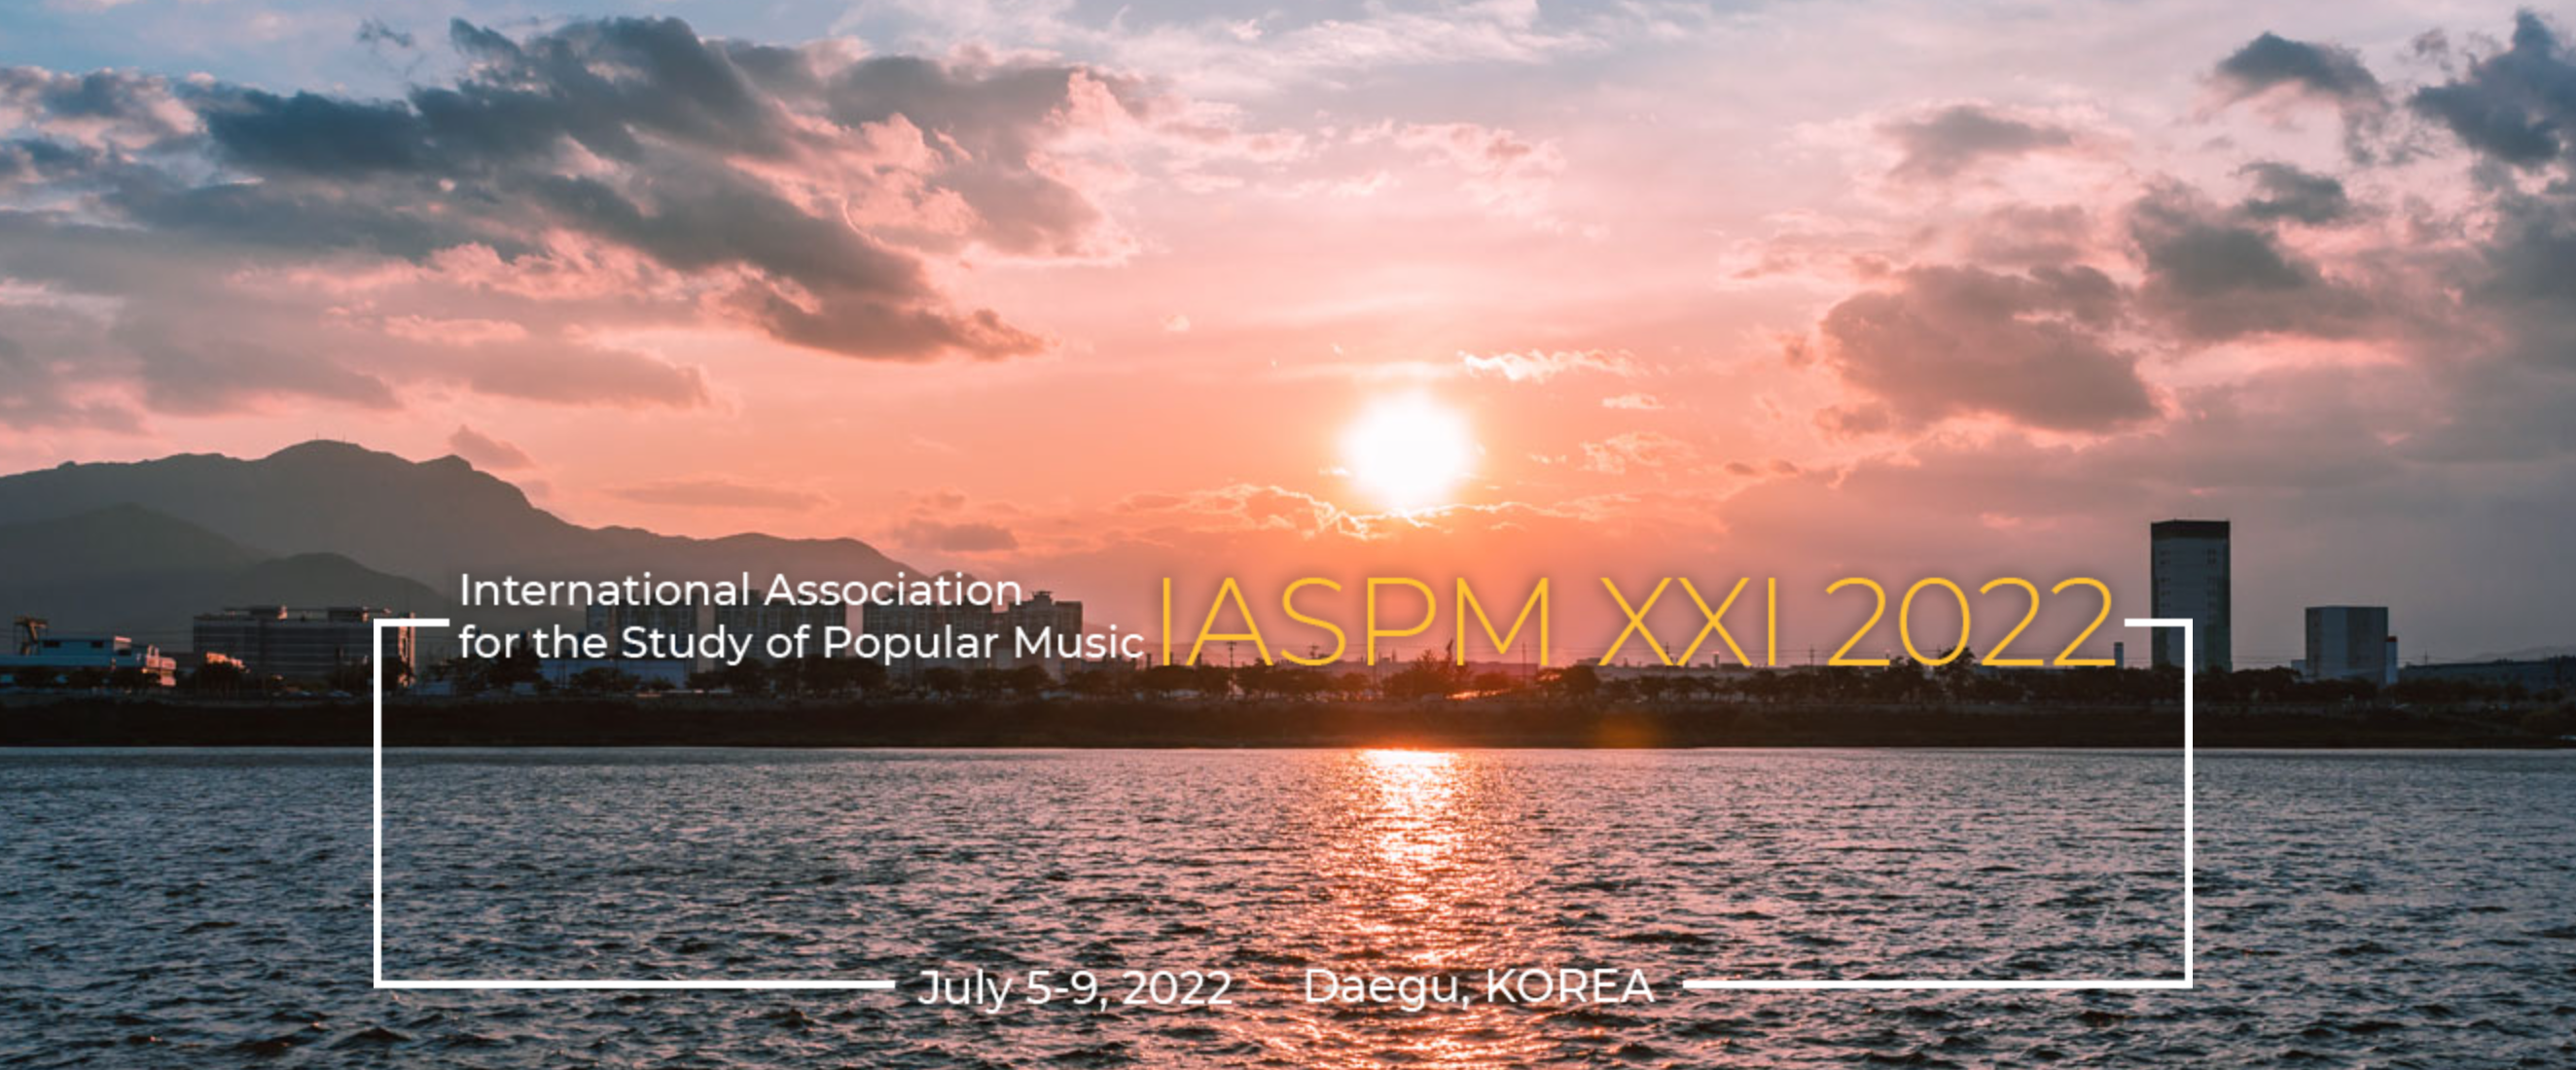 Call for proposals: International Association for the Study of Popular Music (IASPM XXI 2022)